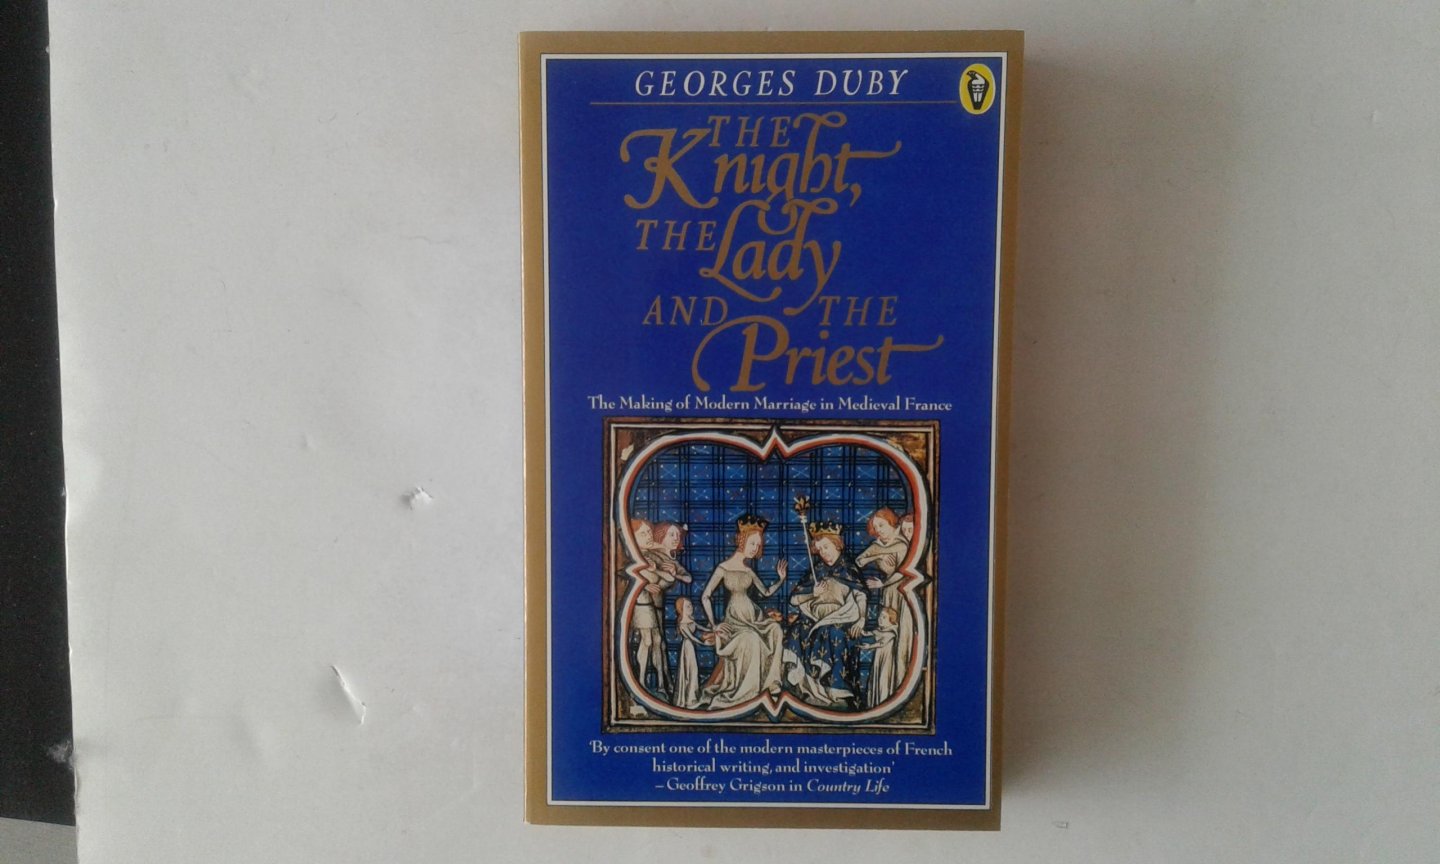 Duby, Georges - The Knight, the Lady and the Priest